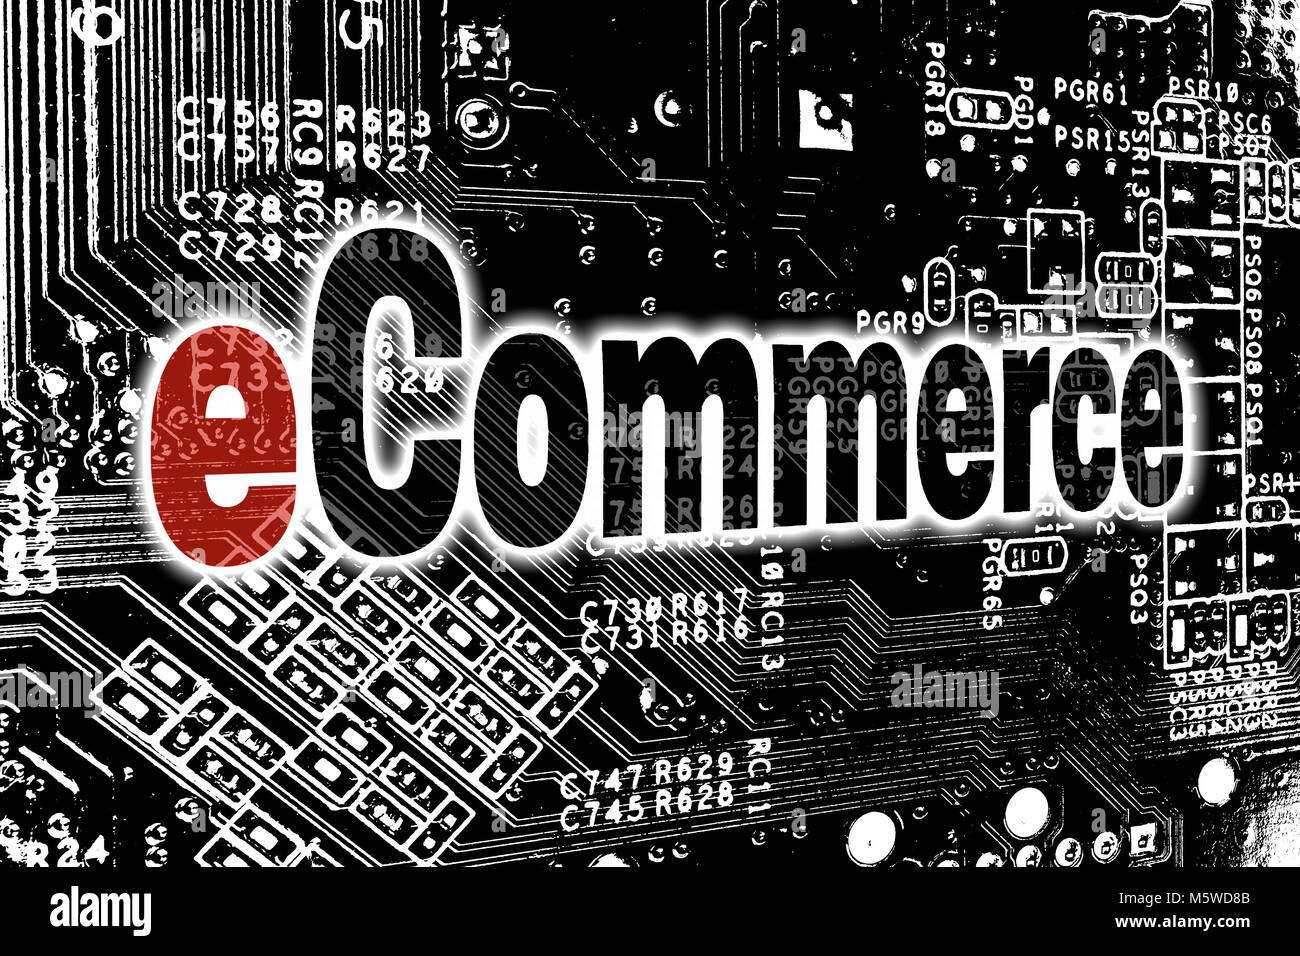 eCommerce with circuit board concept. Stock Photo